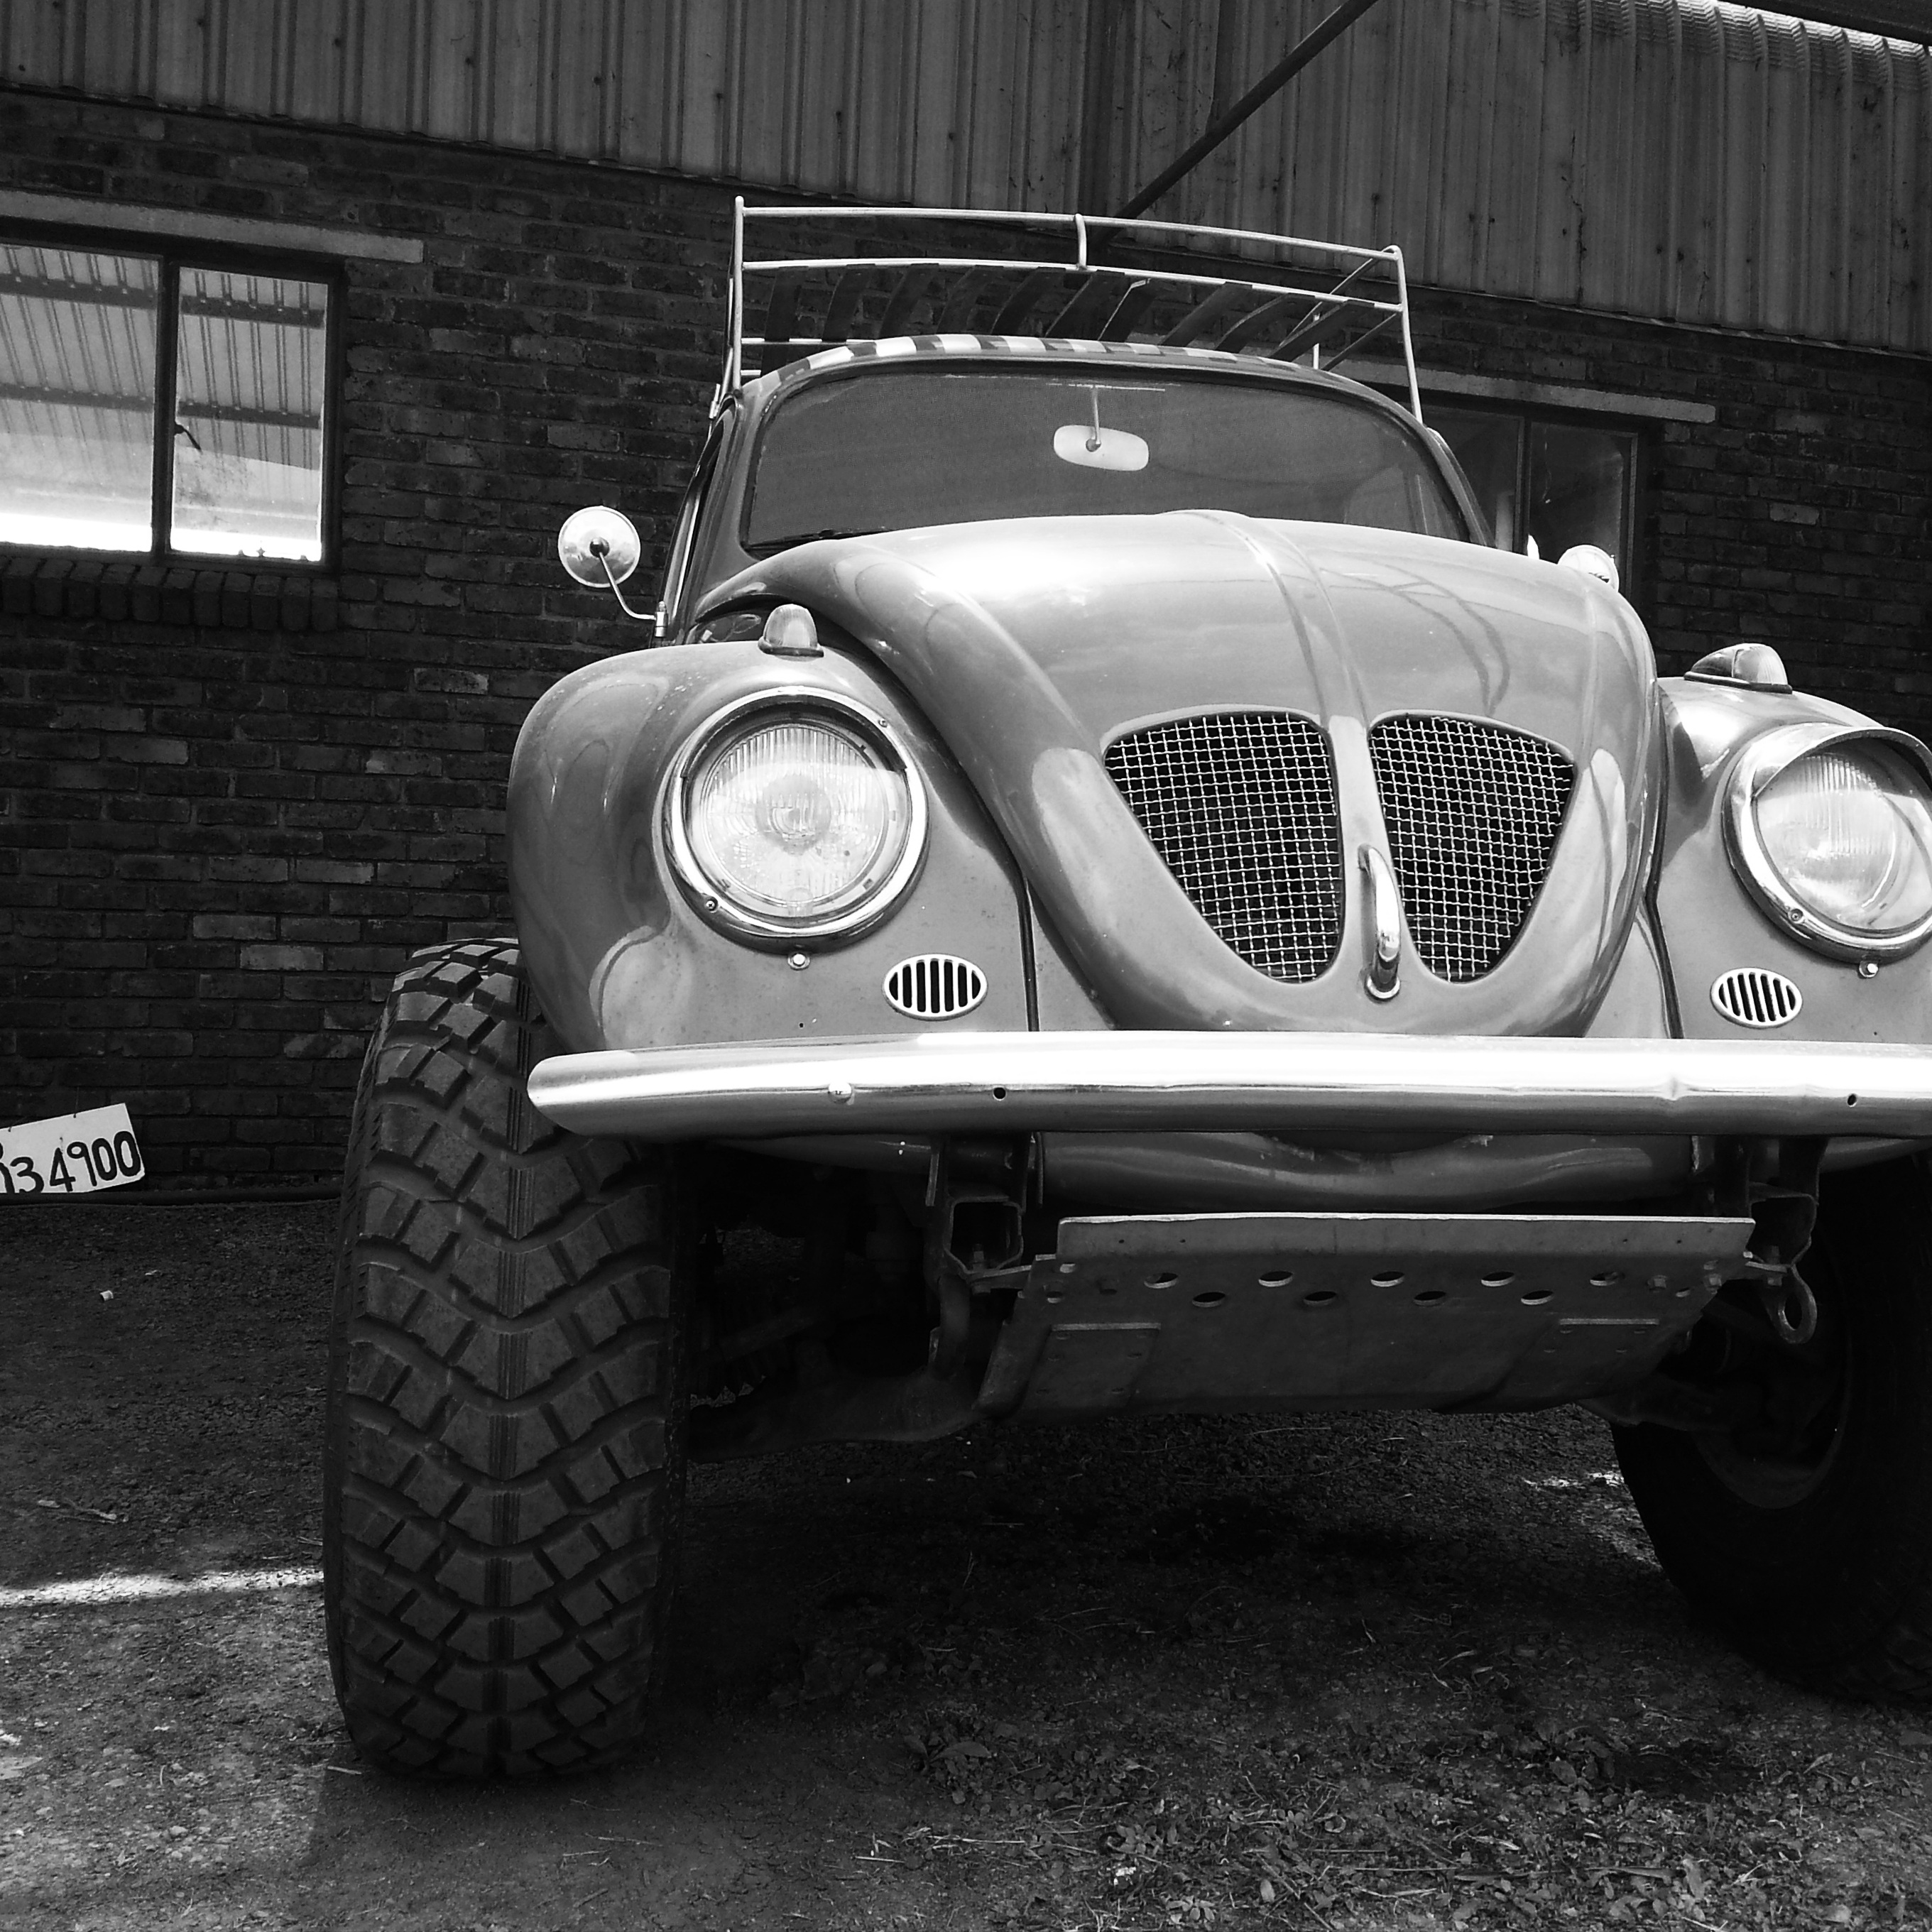 Free Images : black and white, wheel, transportation, auto, toy ...